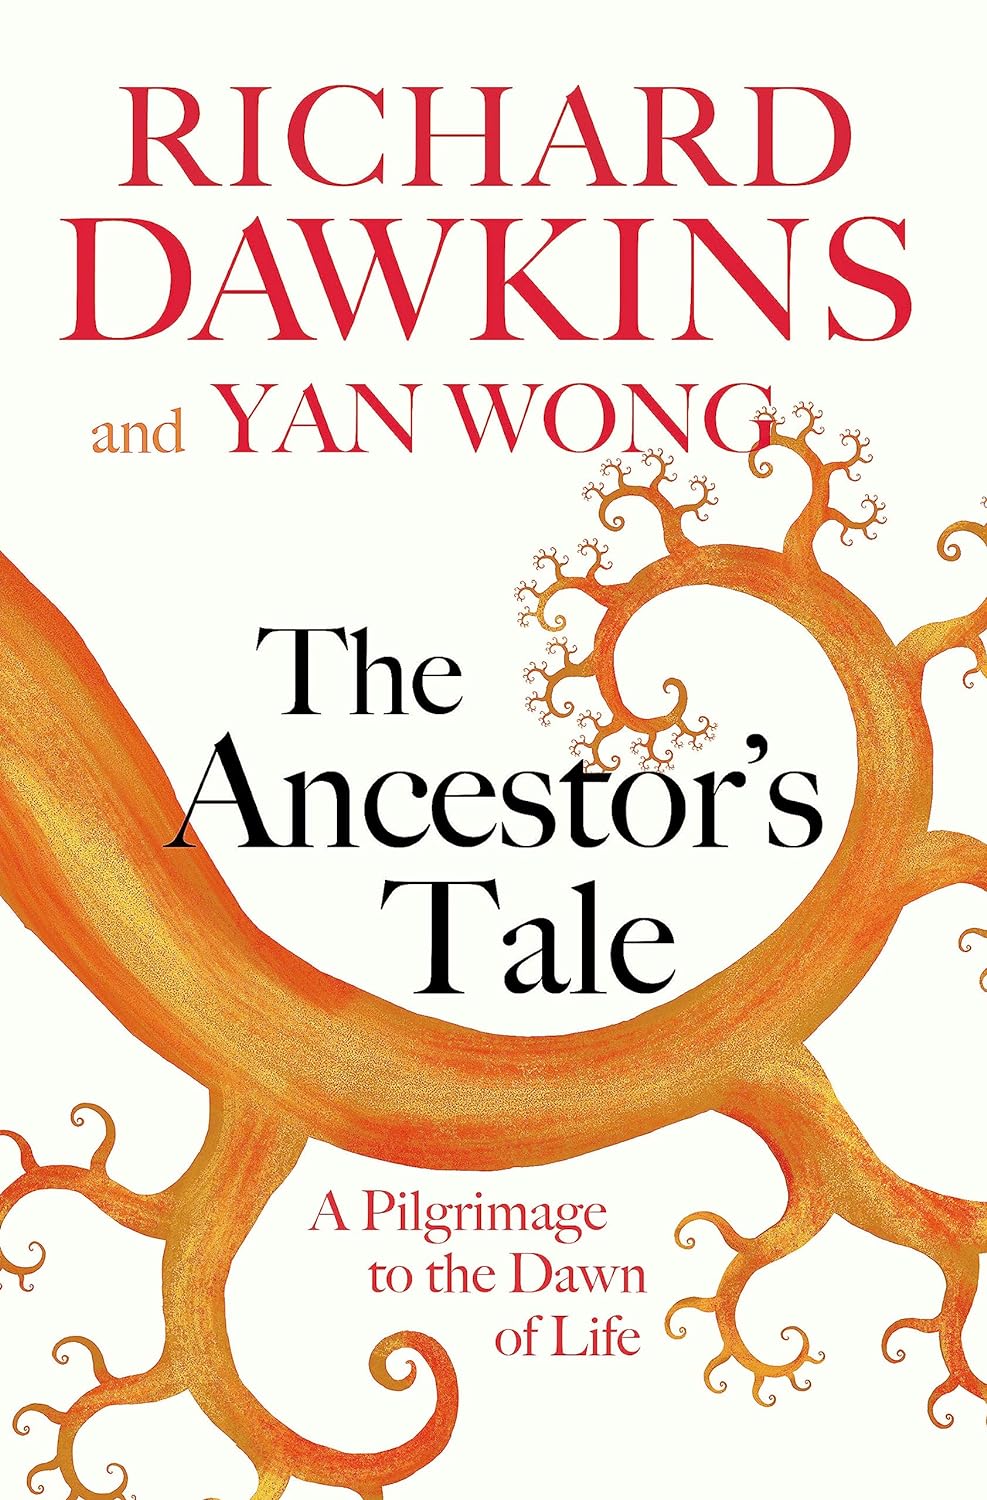 THE ANCESTOR'S TALE: A Pilgrimage to the Dawn of Life Prof Richard Dawkins